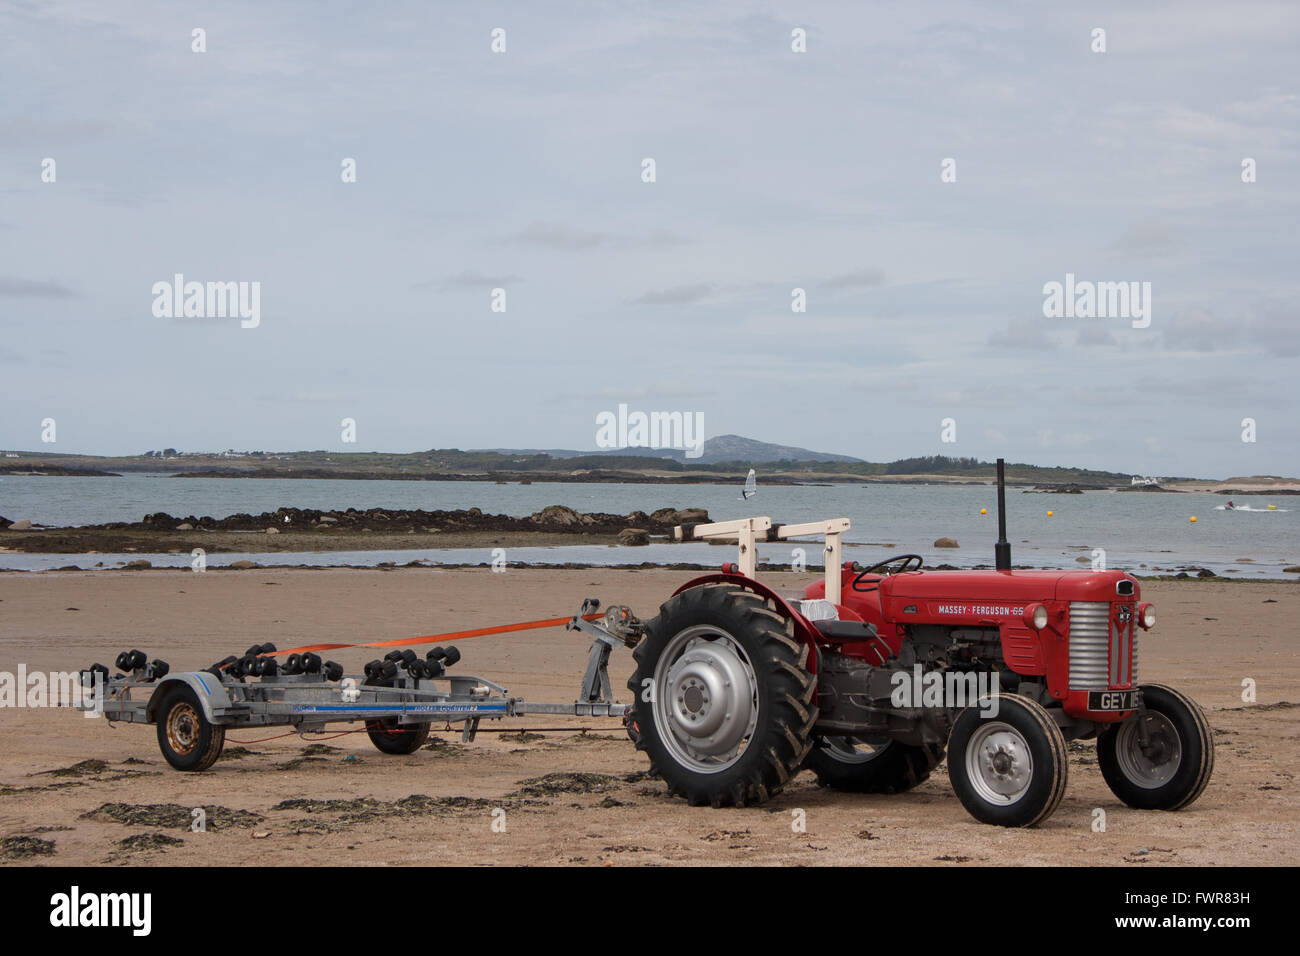 A red Massey Ferguson tractor with empty boat trailer on the beach at Rhosneigr, Anglesey, Wales, UK. Stock Photo